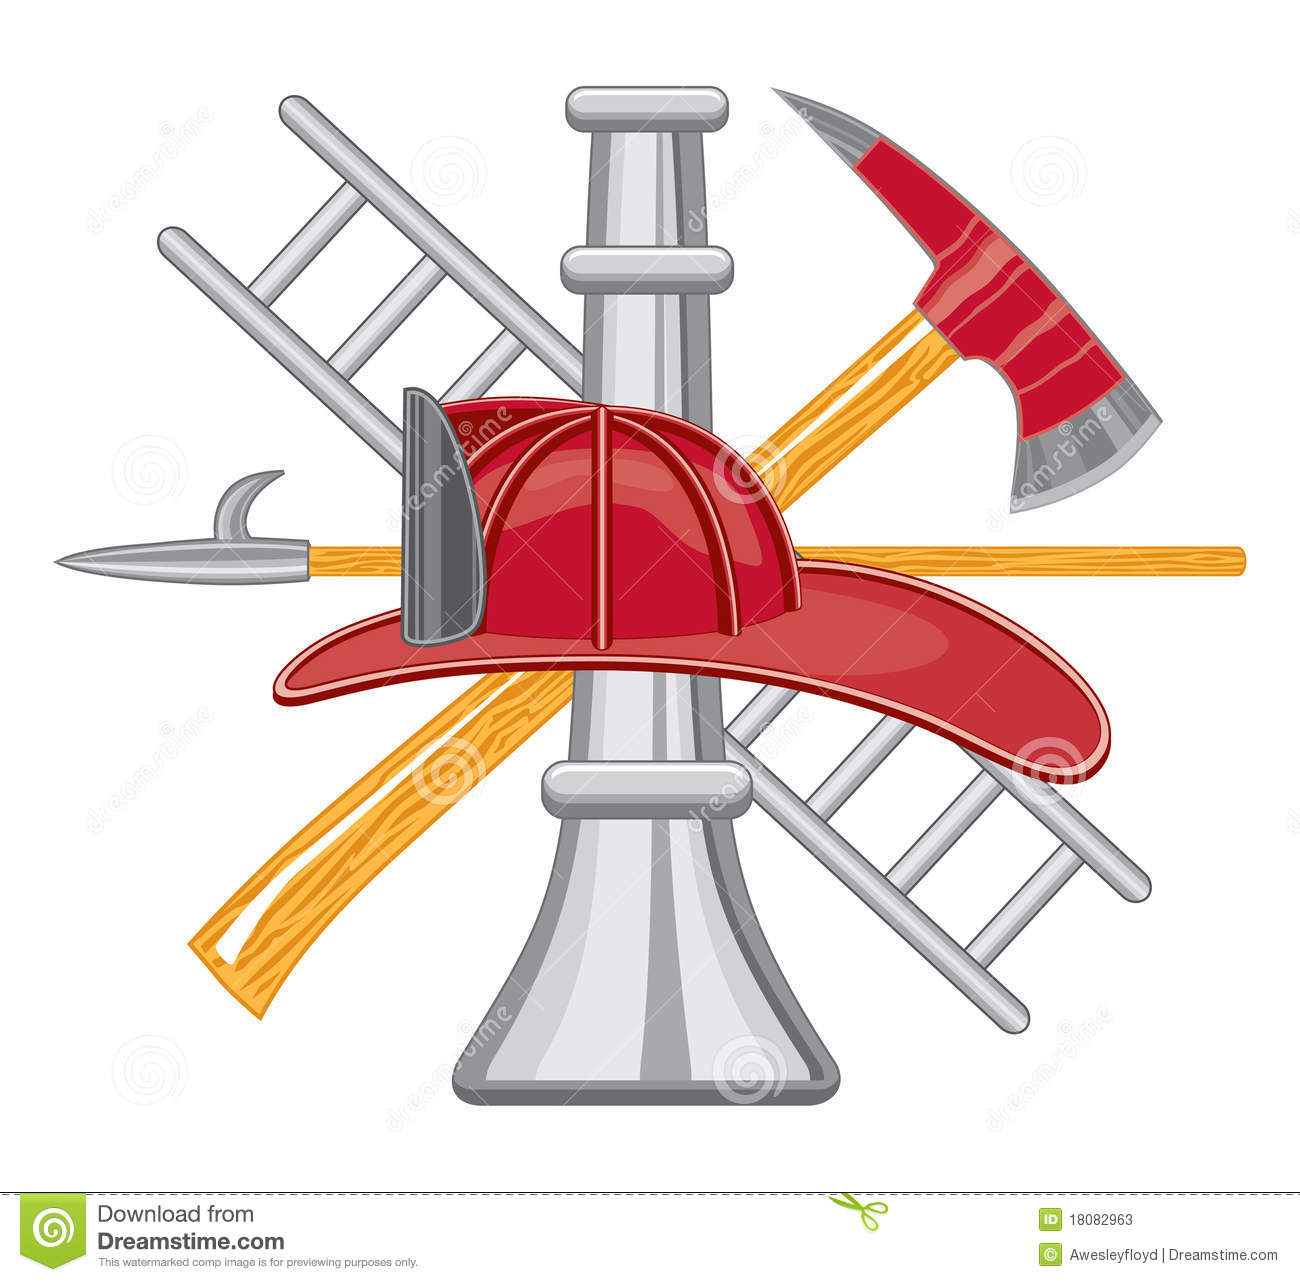 Illustration Of Crossed Firefighter Tools Including A Firefighter Hat